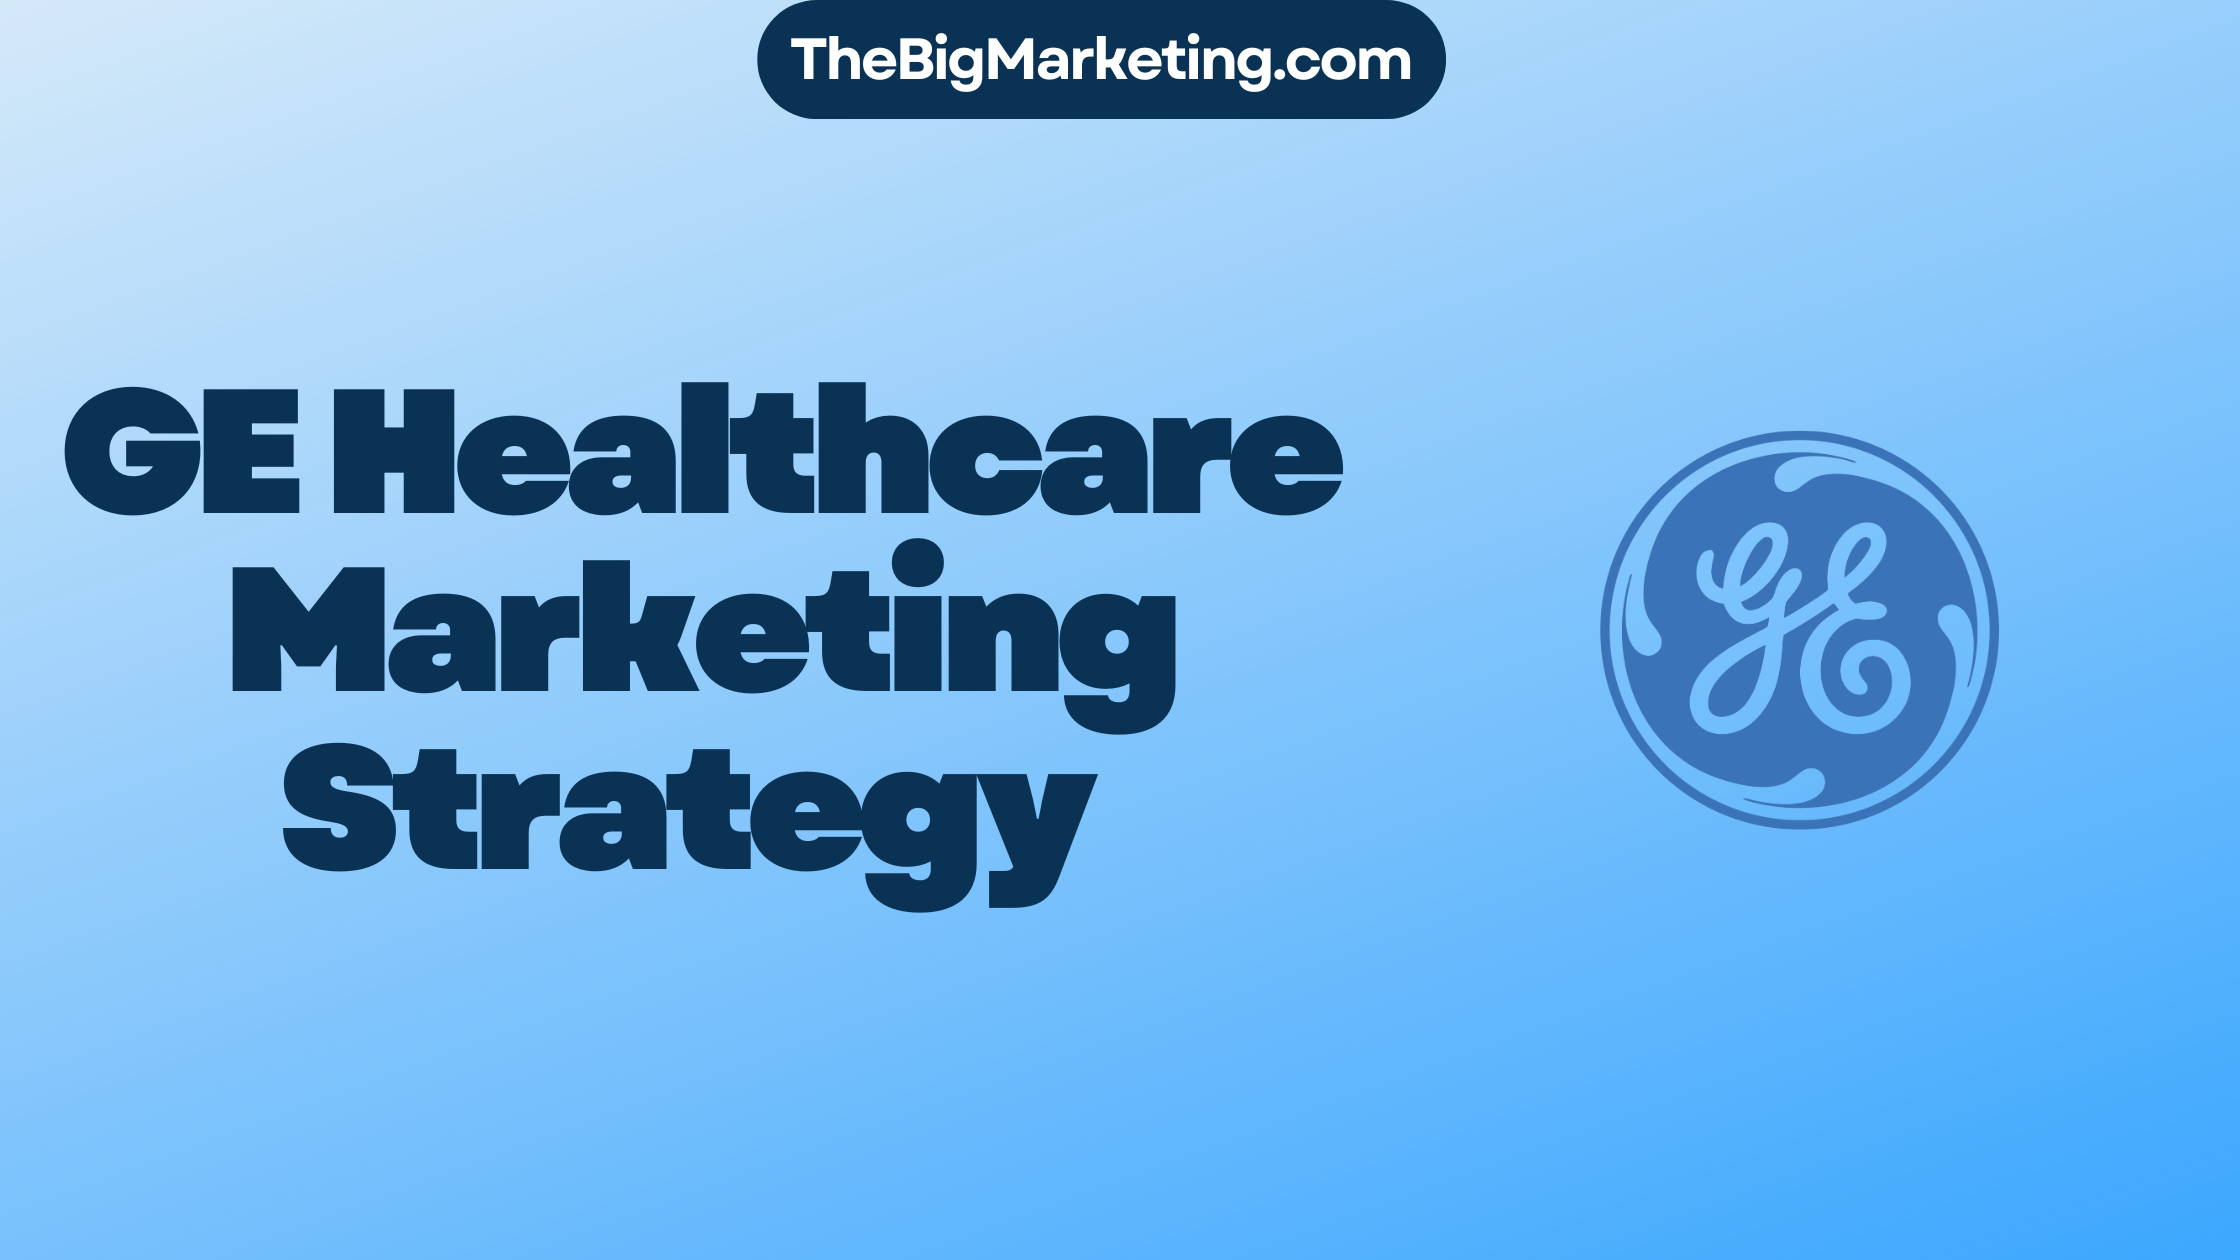 GE Healthcare Marketing Strategy